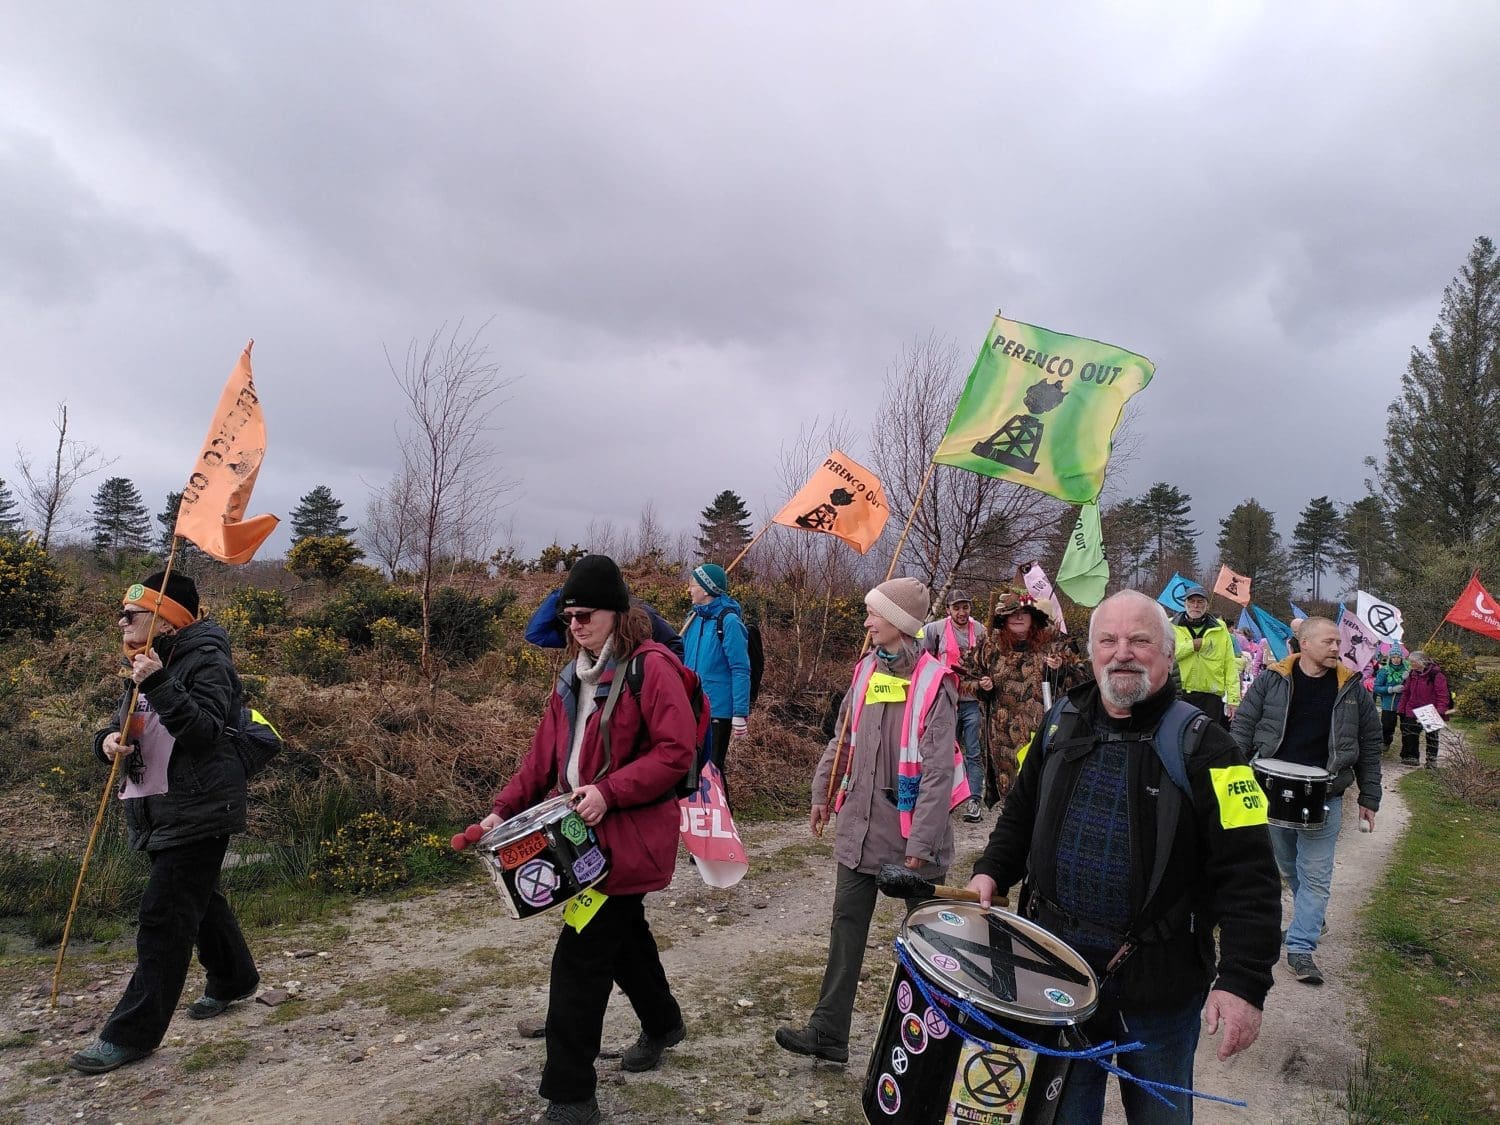 Protesters march with drums and "Perenco out" flags across the lowland heath. 